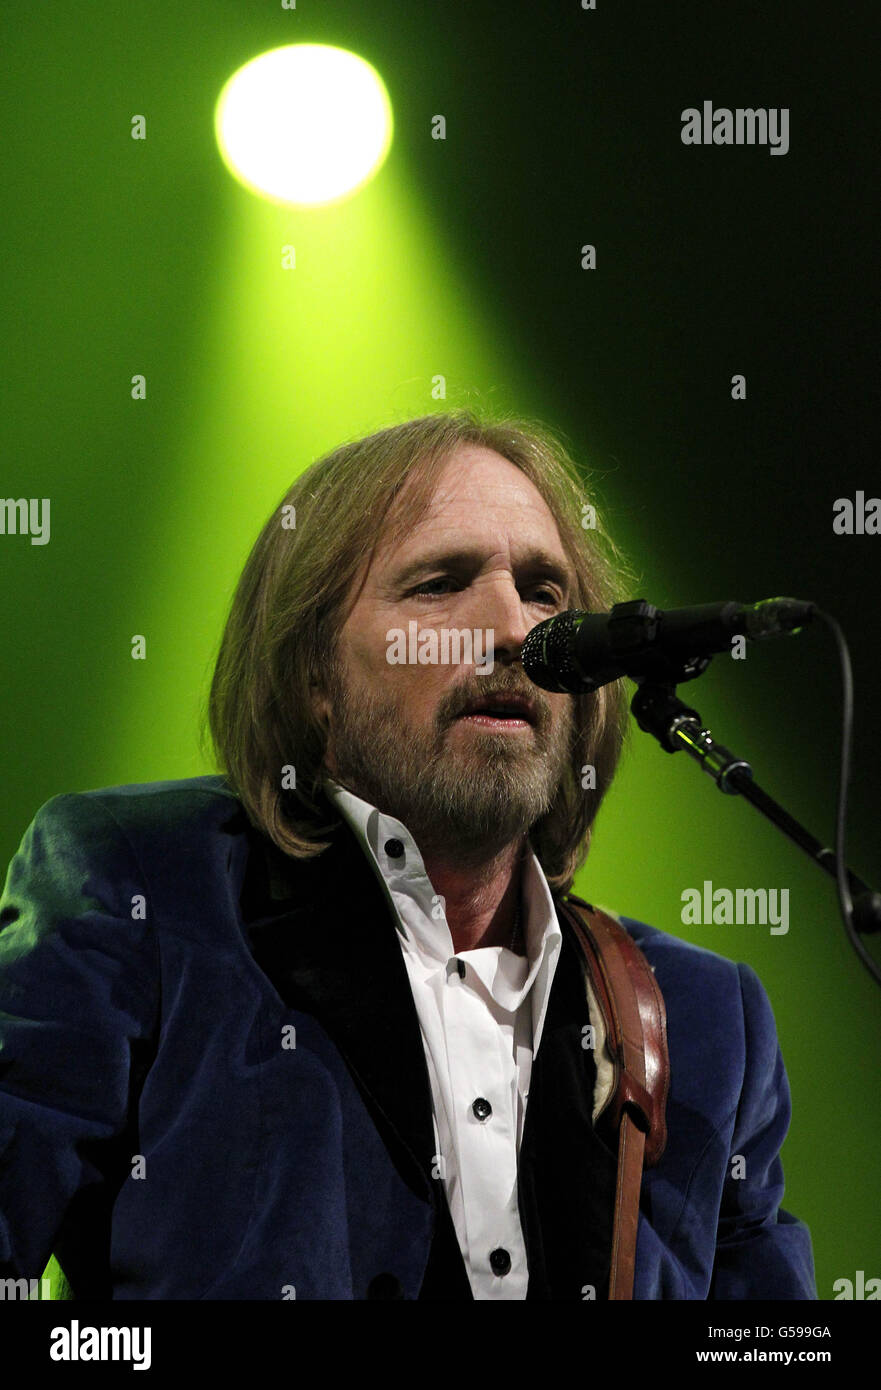 Isle of Wight Festival 2012 - Friday. Tom Petty and the Heartbreakers perform on the Big Top stage at the Isle of Wight Festival. Stock Photo